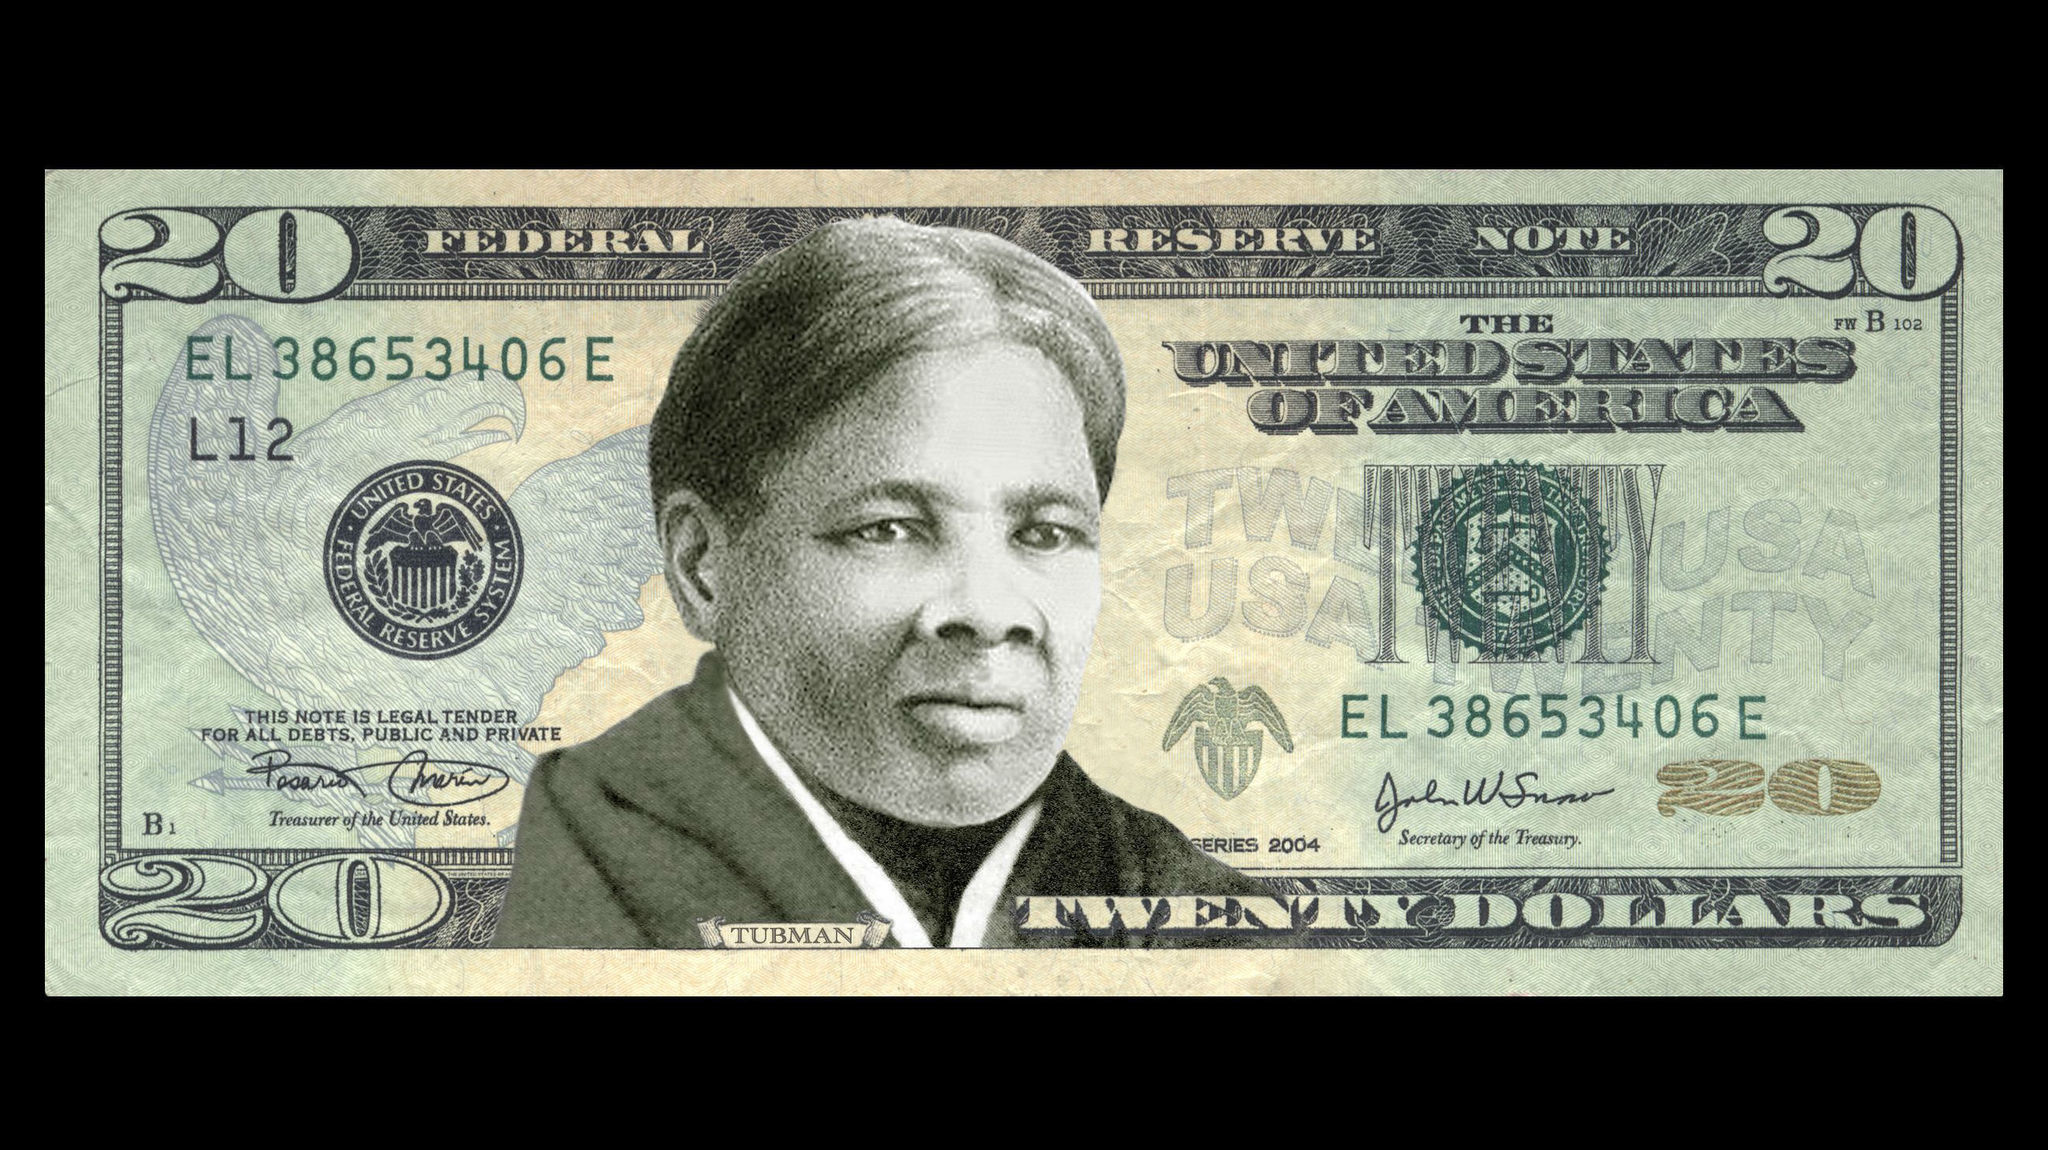 Harriet Tubman on the $20 bill? Let's get on with it - Chicago Tribune